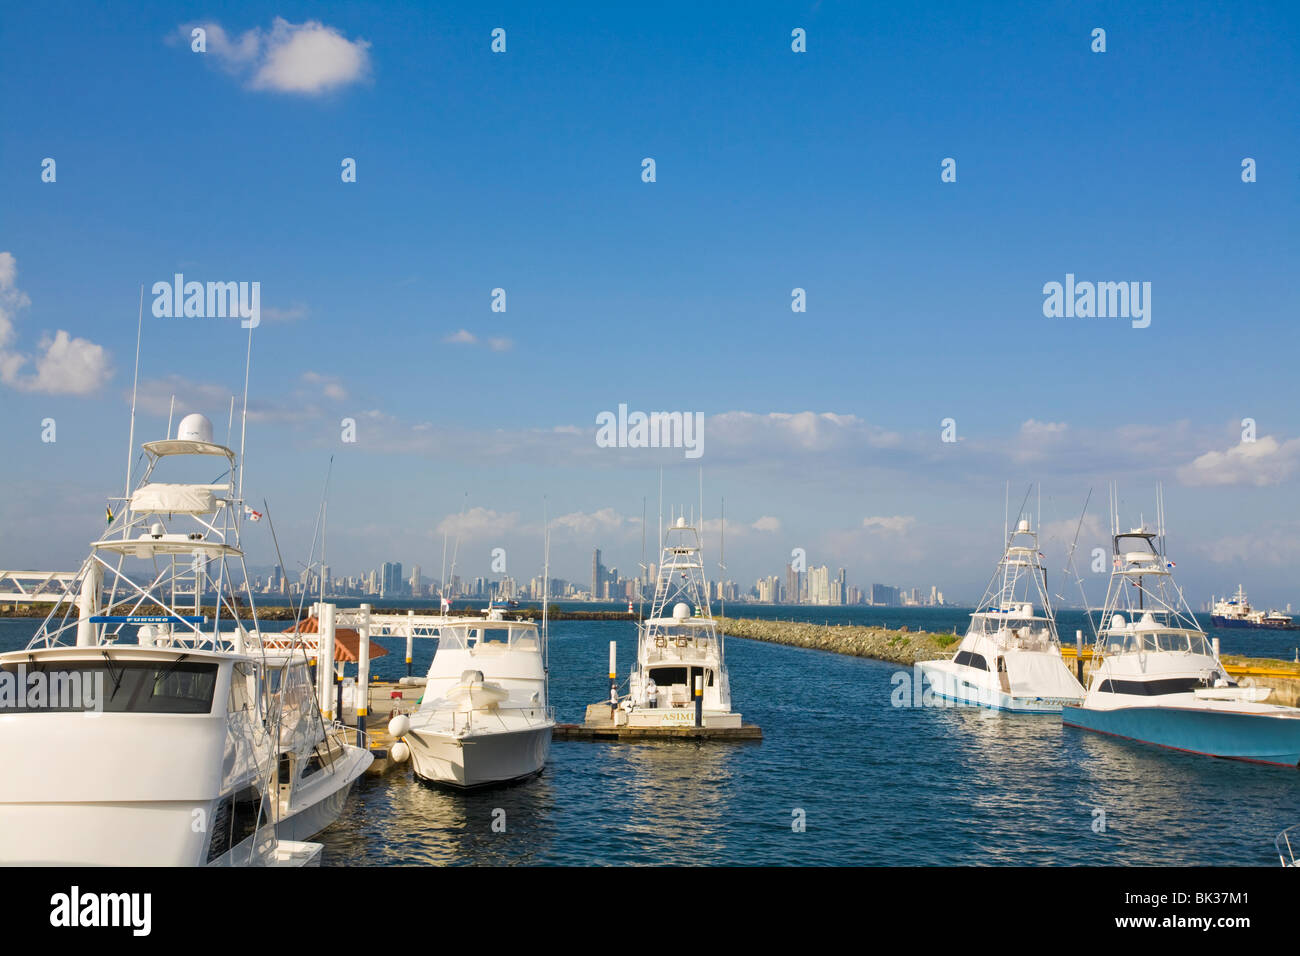 The Amador Causeway, Fuerte Amador Resort and Marina, with city skyline in background, Panama City, Panama, Central America Stock Photo